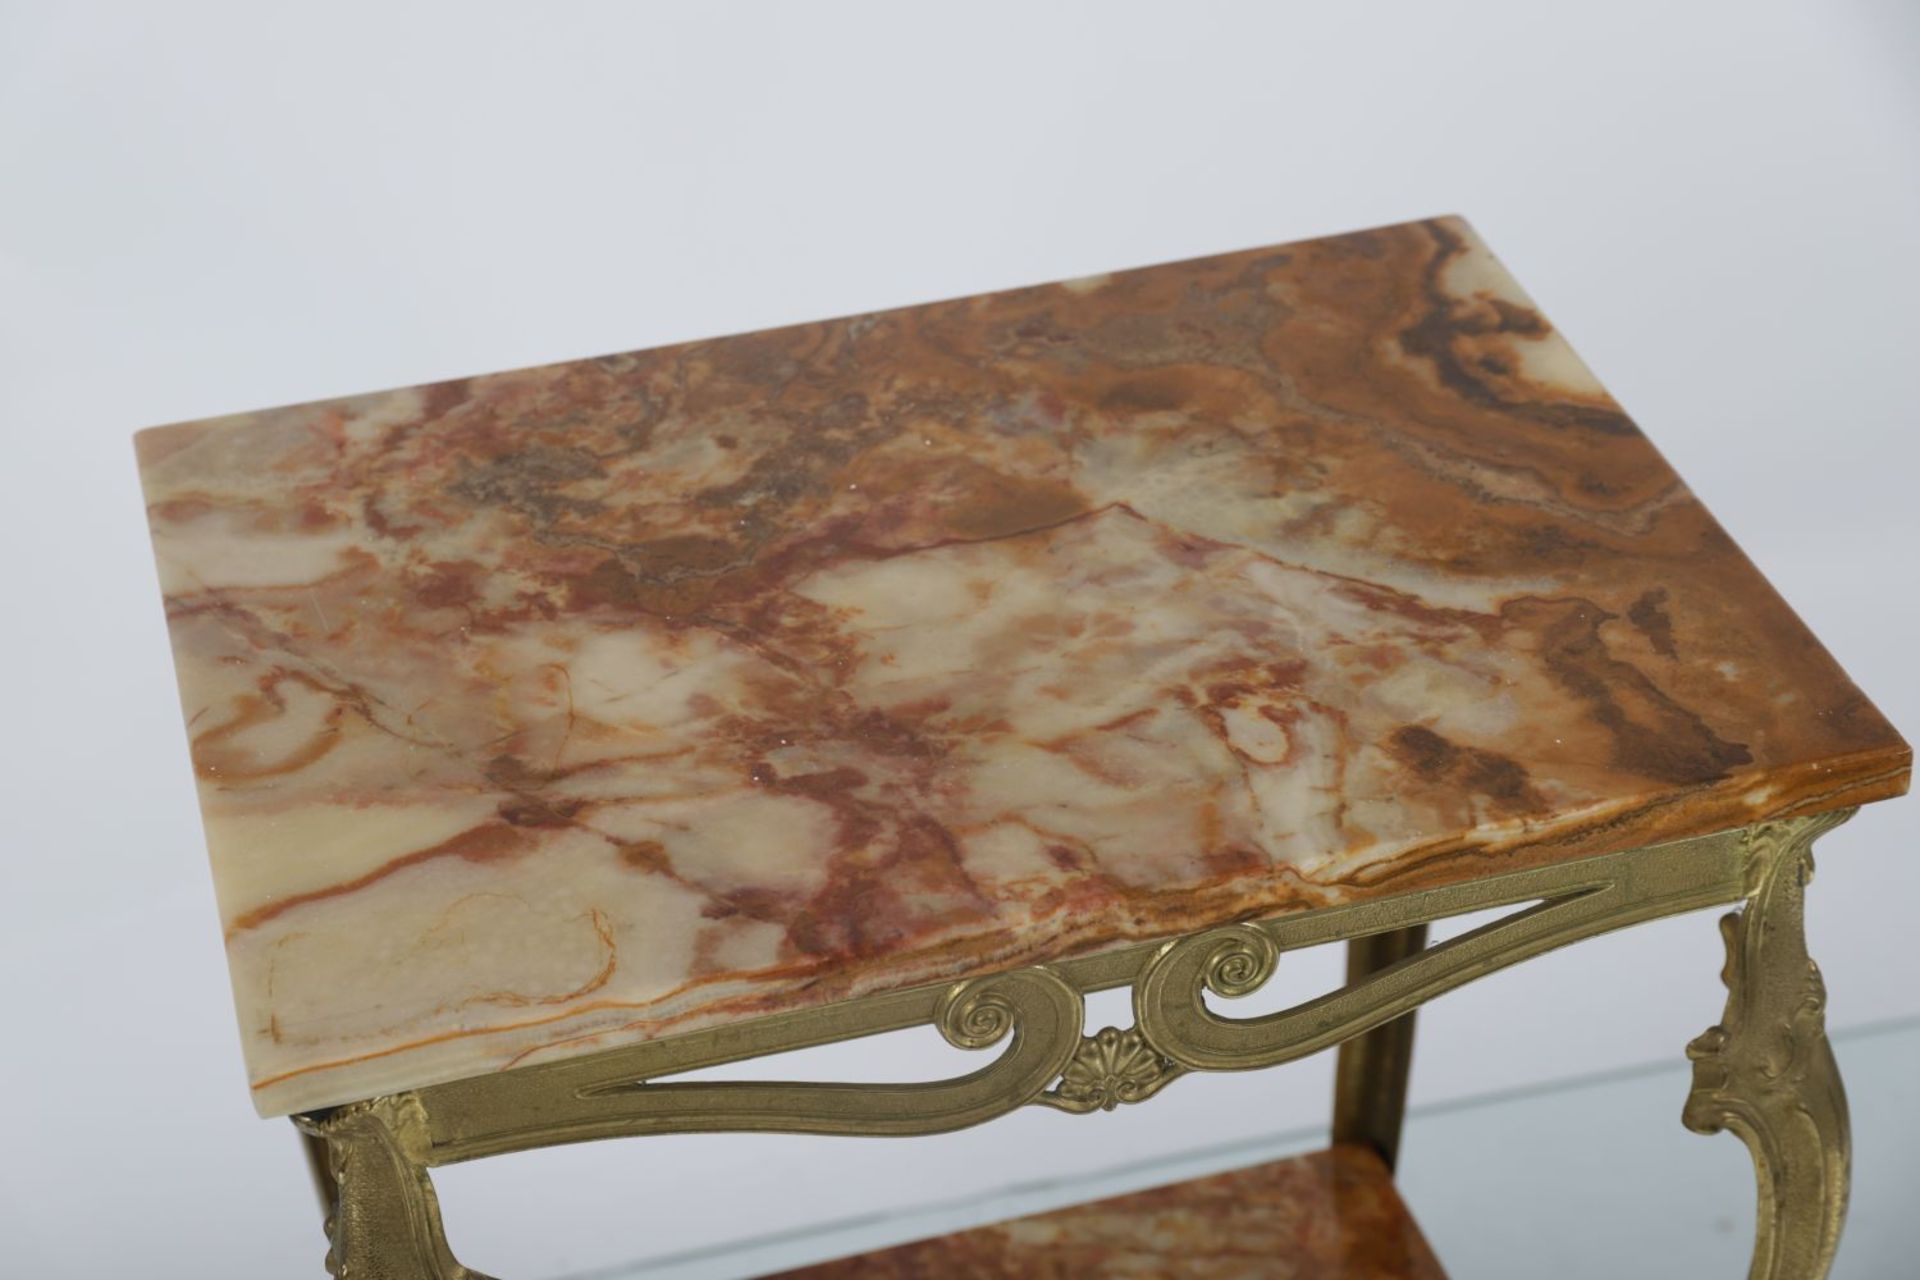 ART NOUVEAU BRASS & MARBLE TABLE - Image 3 of 3